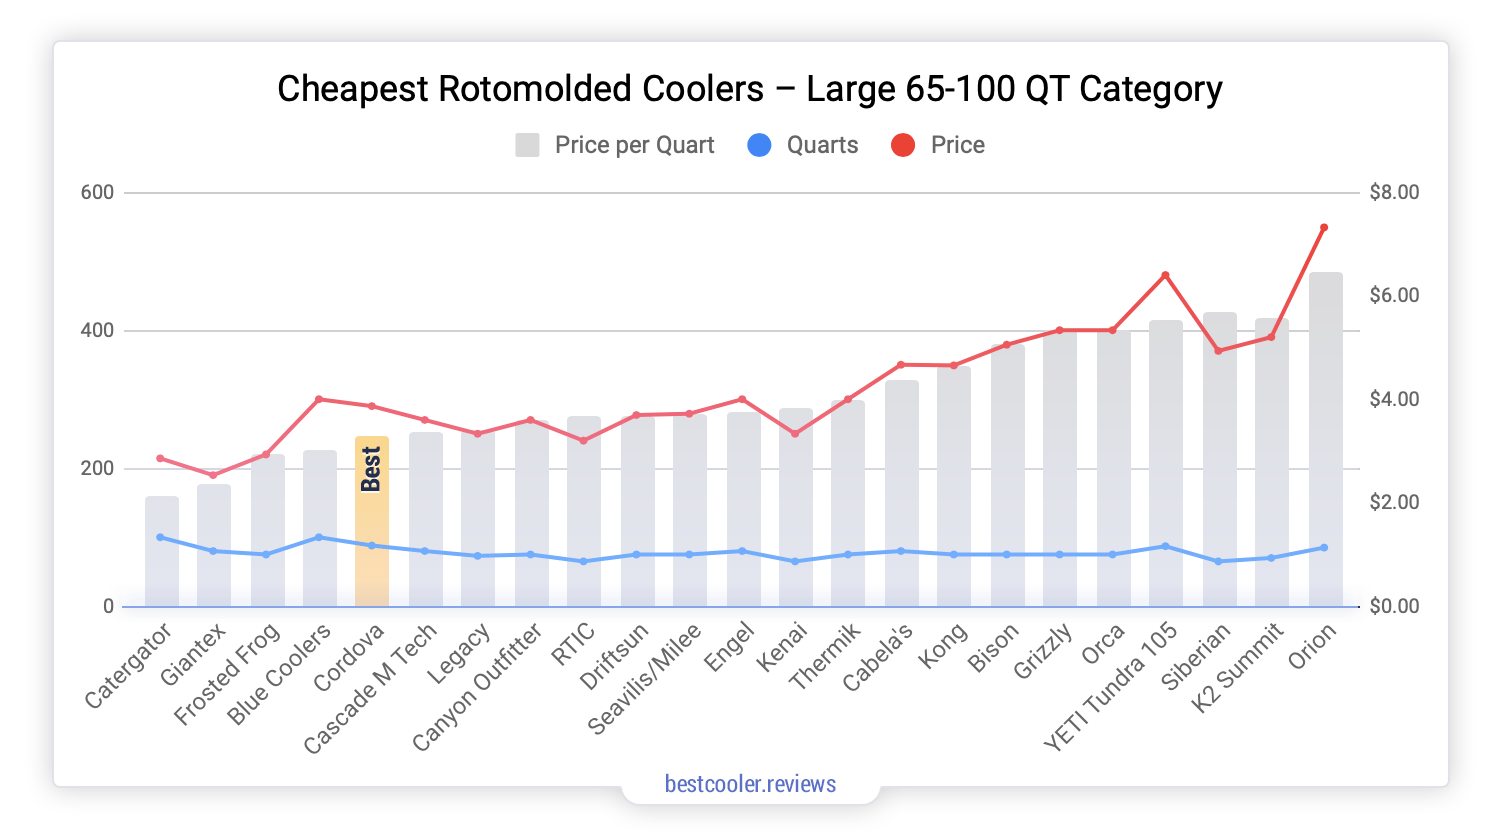 Cheapest Rotomolded Coolers Large Category